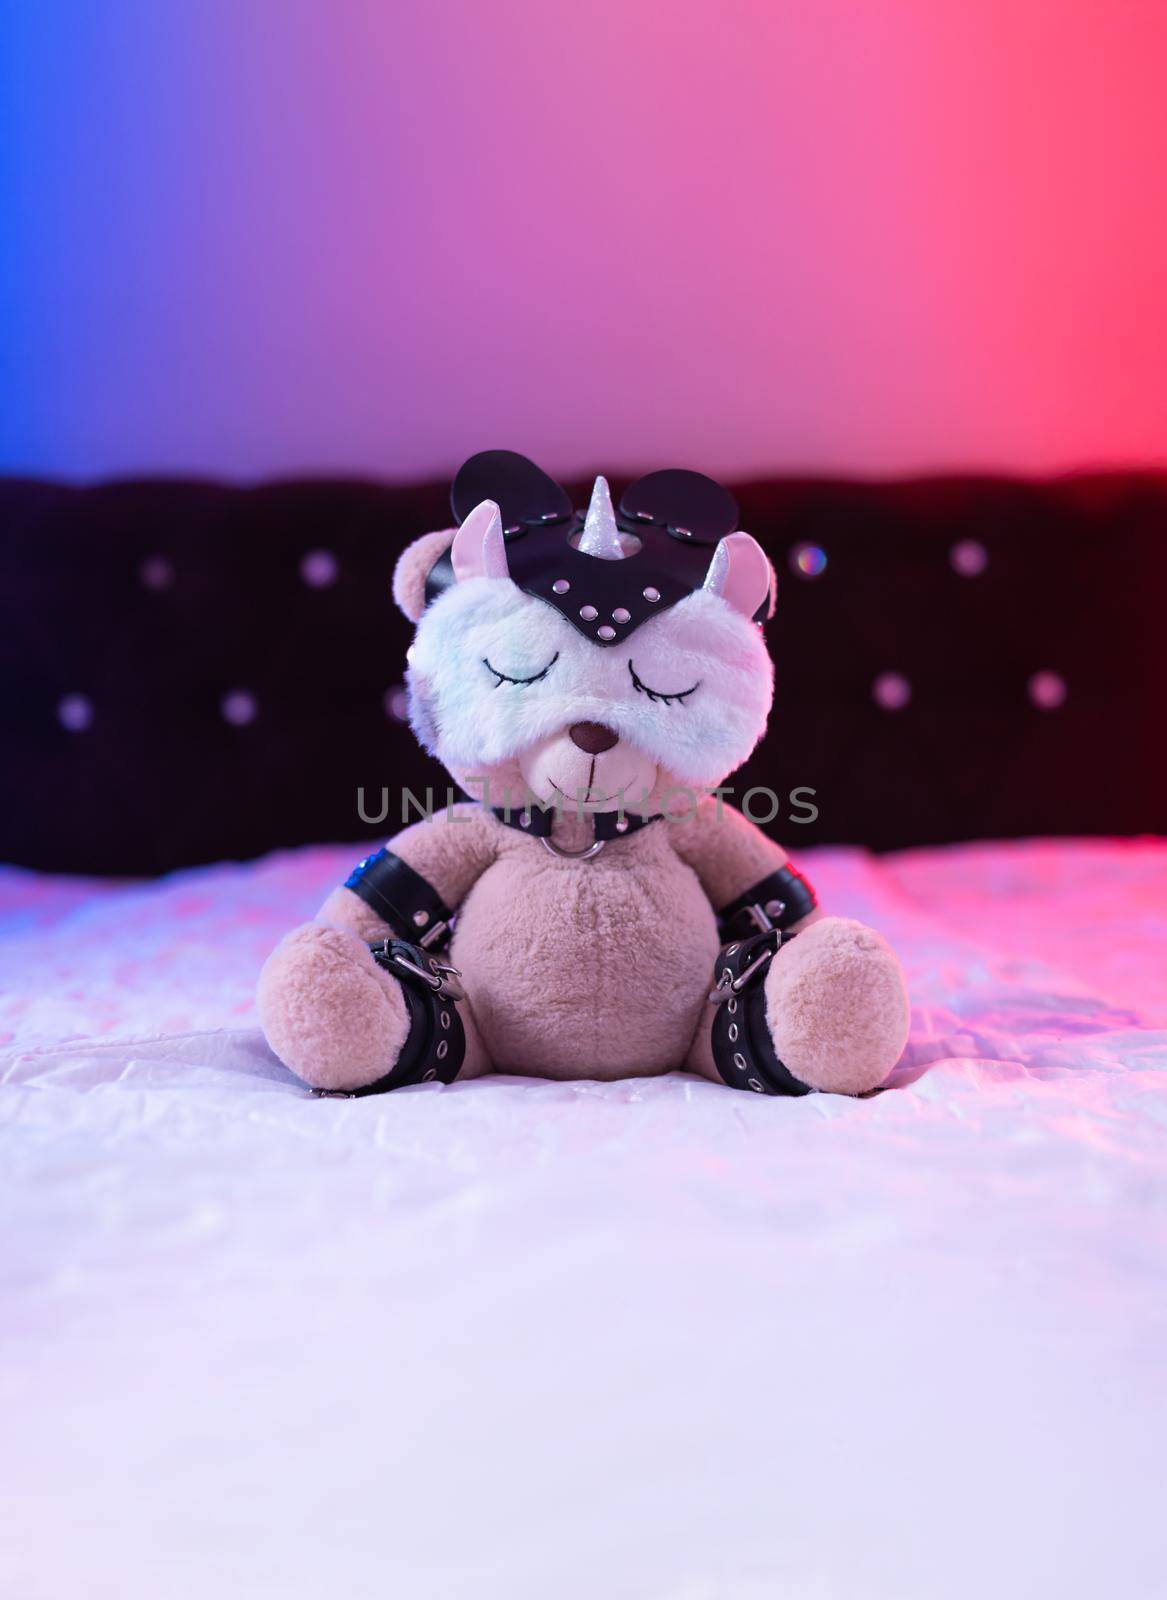 the toy teddy bear dressed in leather straps and a mask, an accessory for BDSM games in a sleep mask